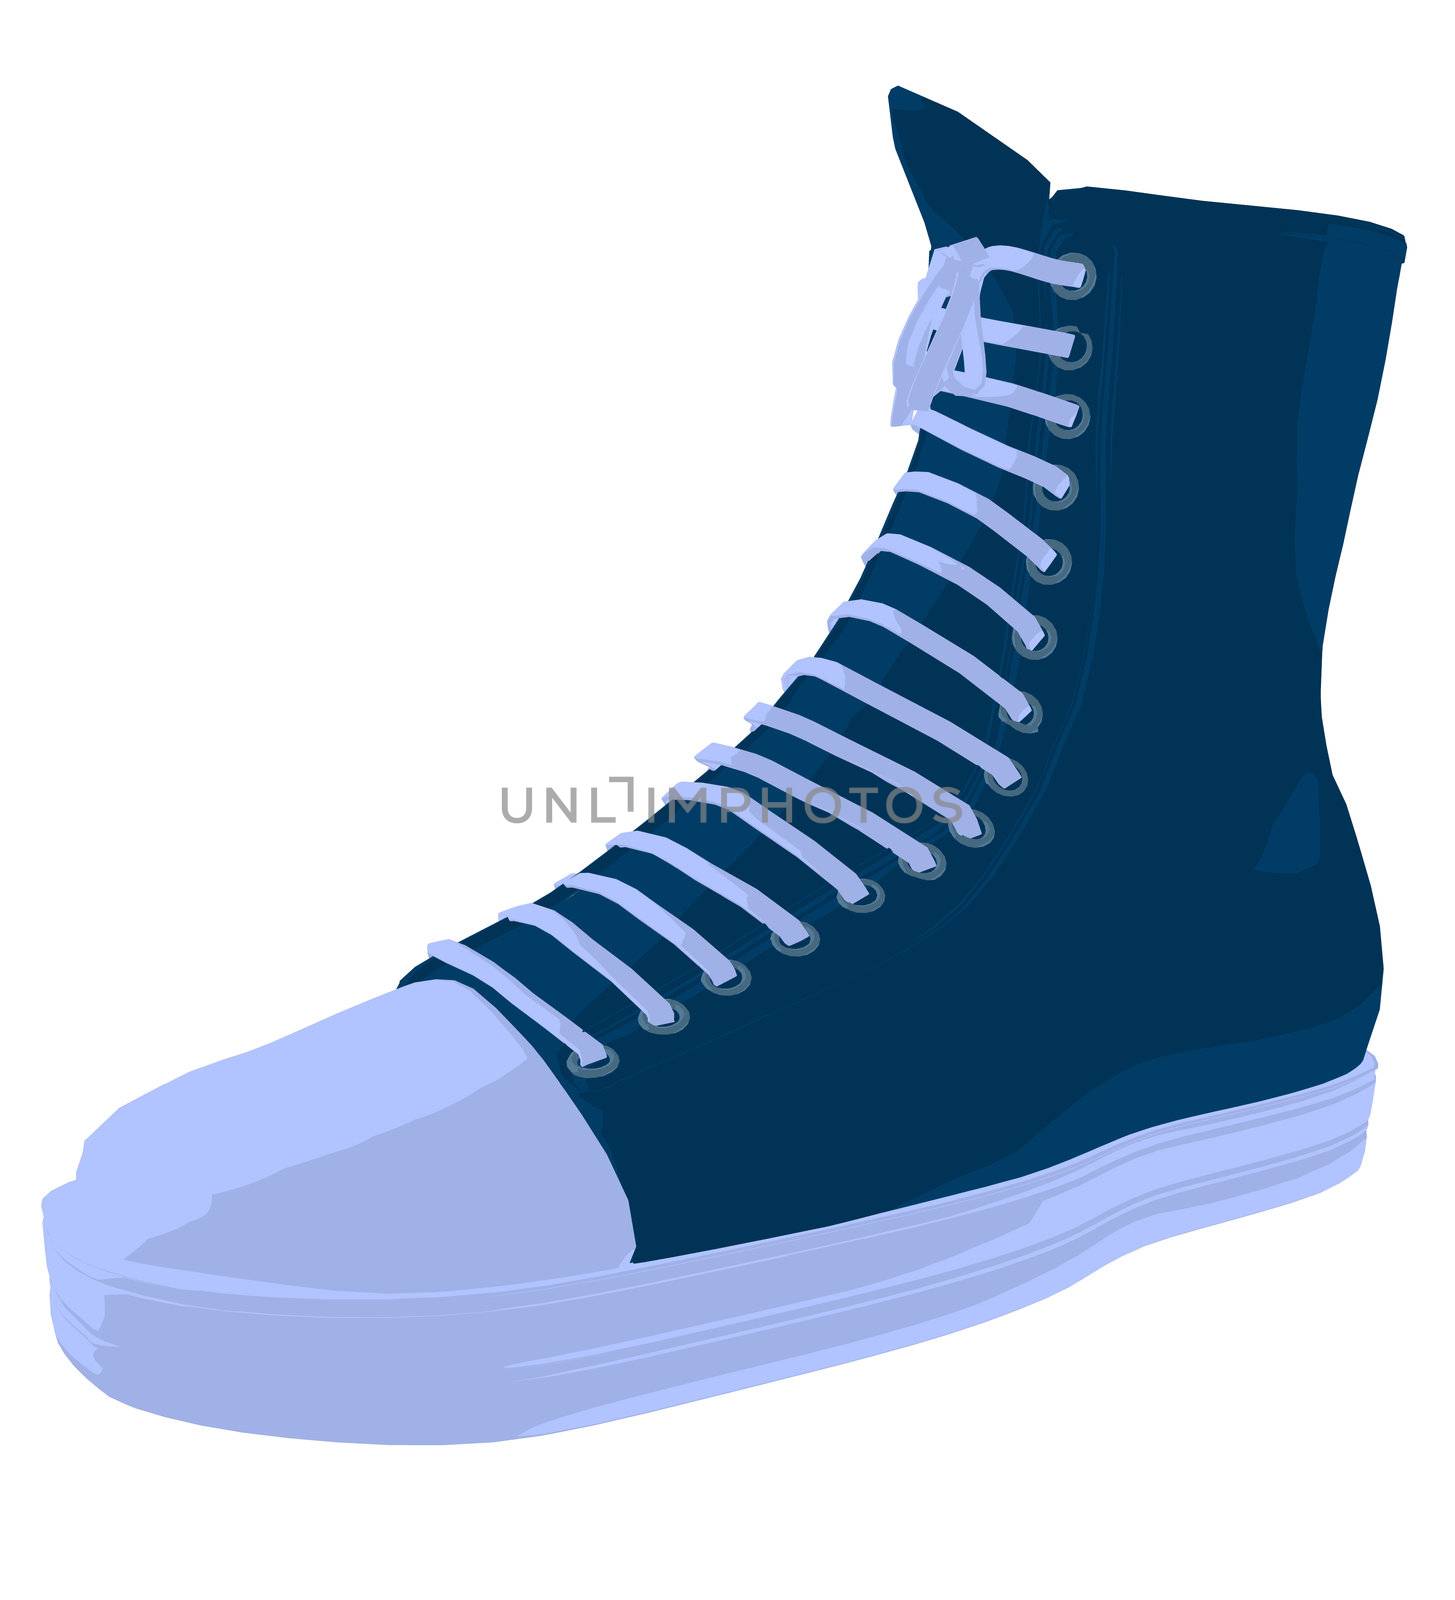 Basketball Sneakers Illustration by kathygold